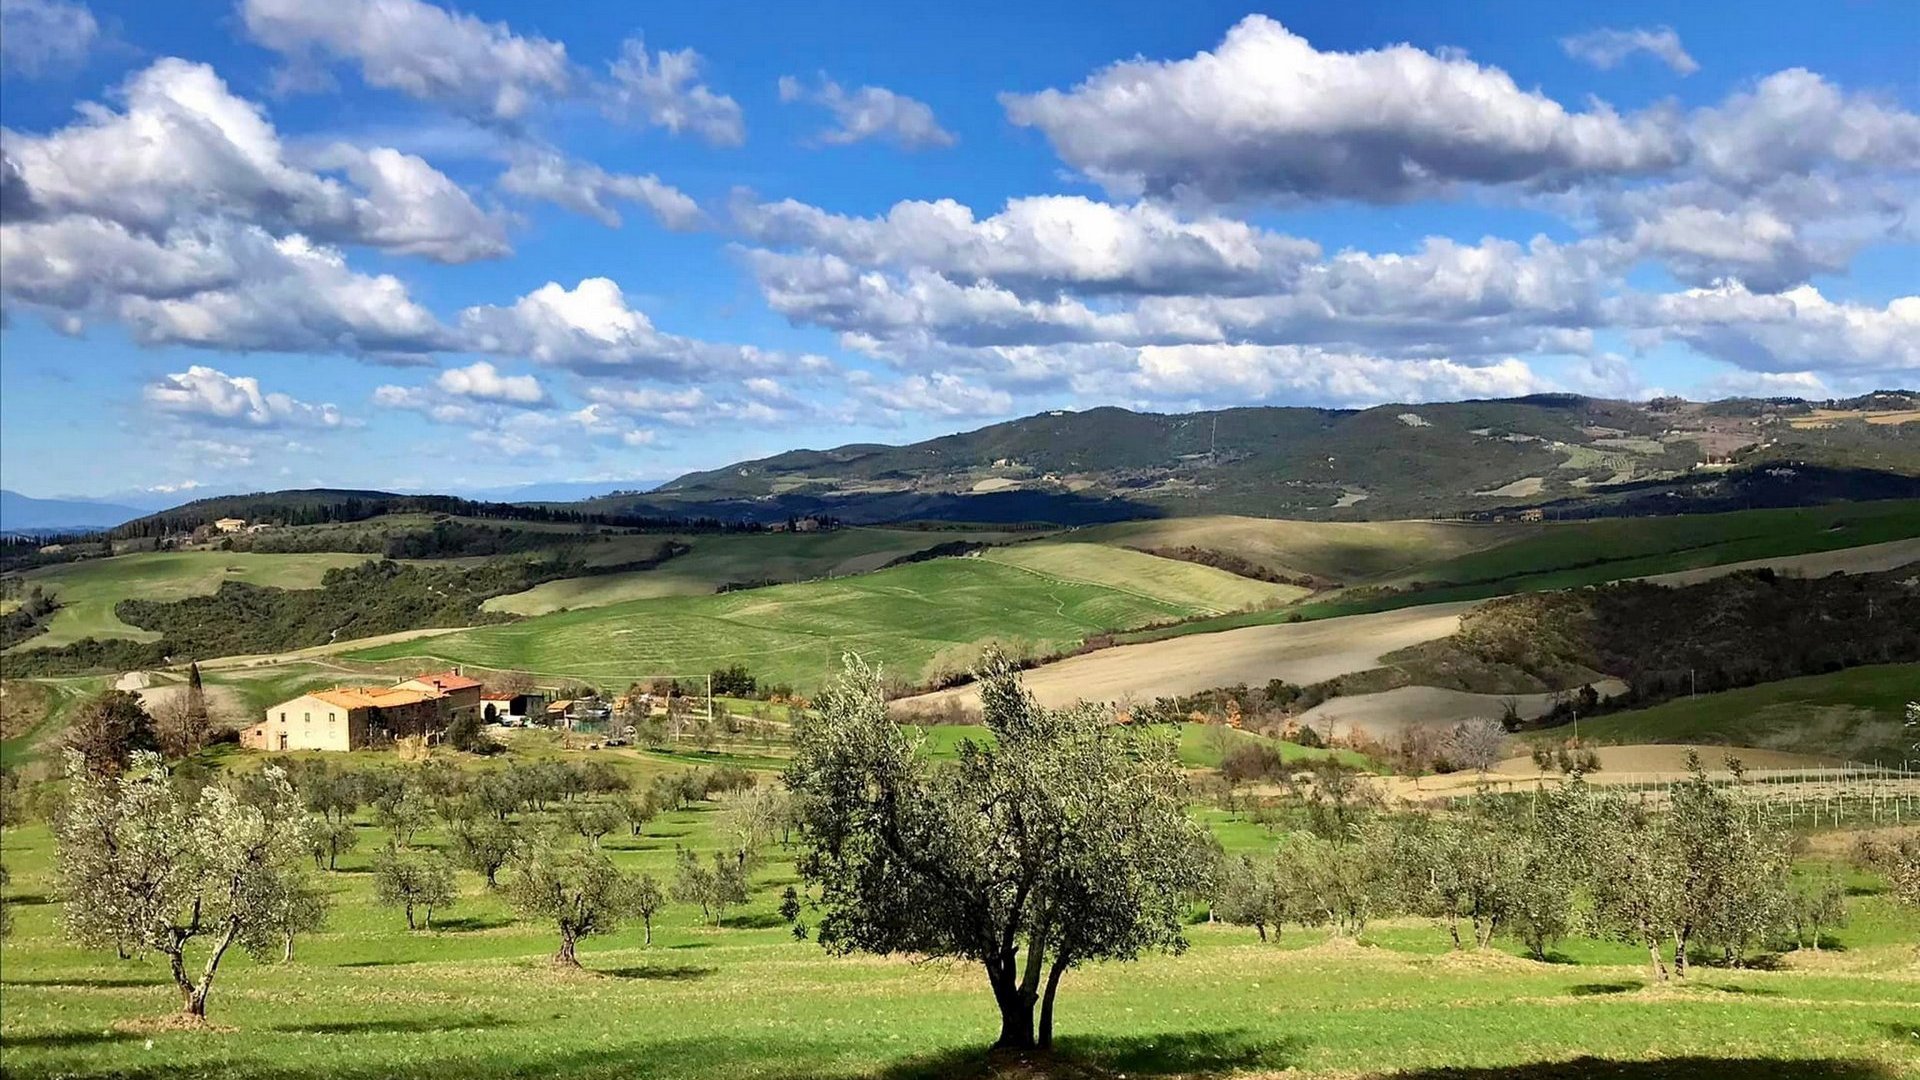 Guided trekking in the hills and countryside between Empoli and Montespertoli